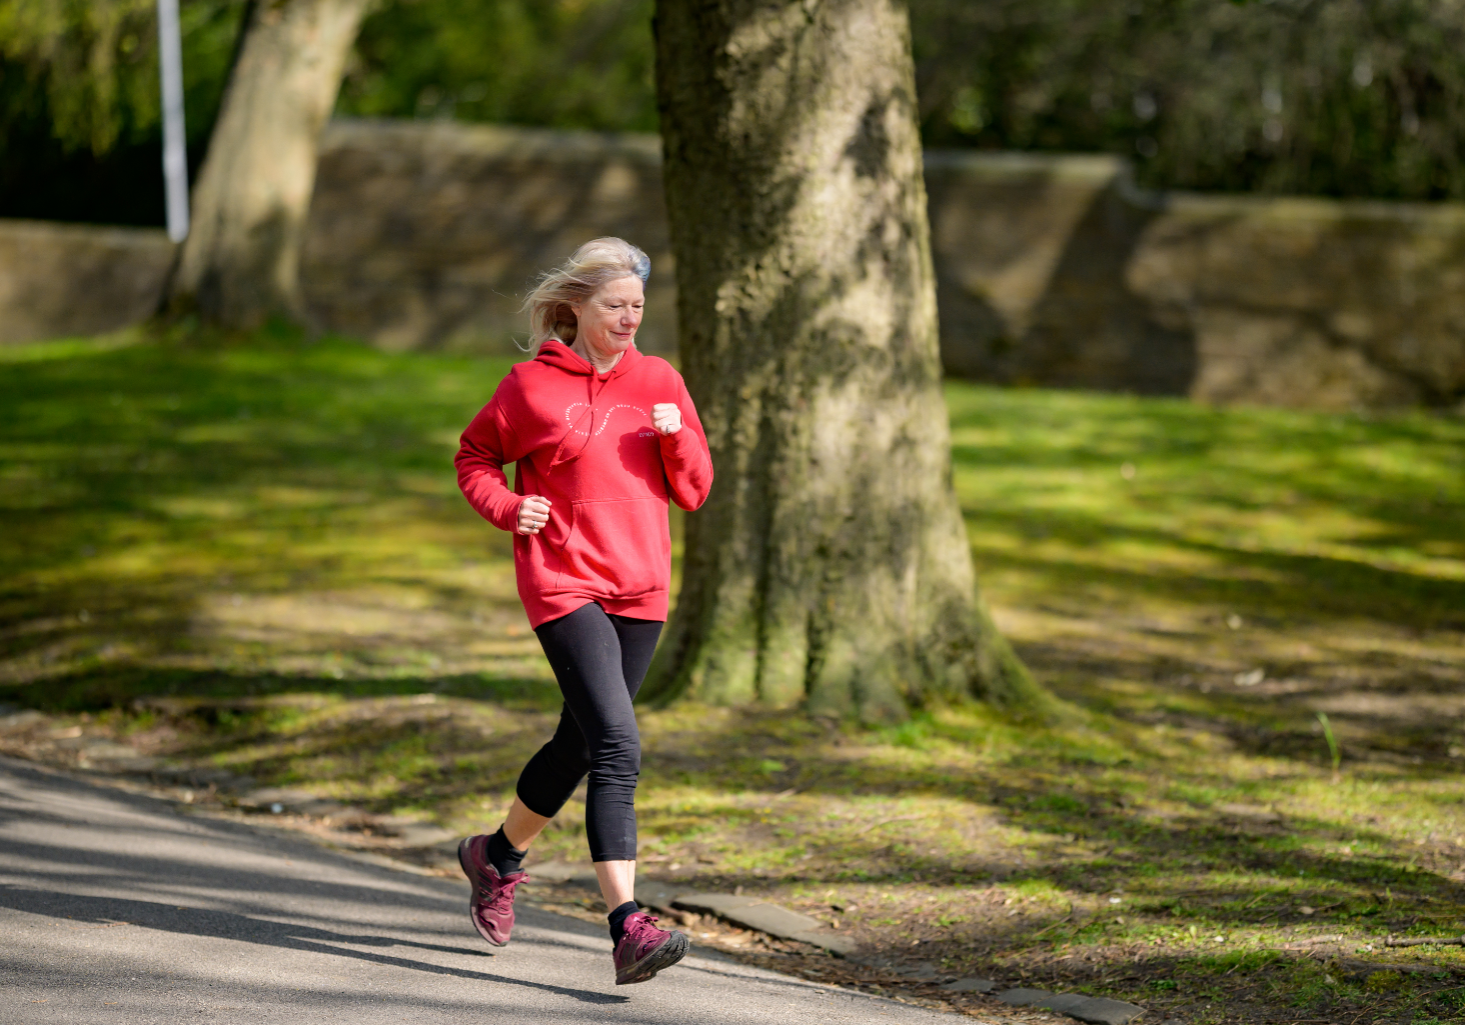 Woman with red top running in park